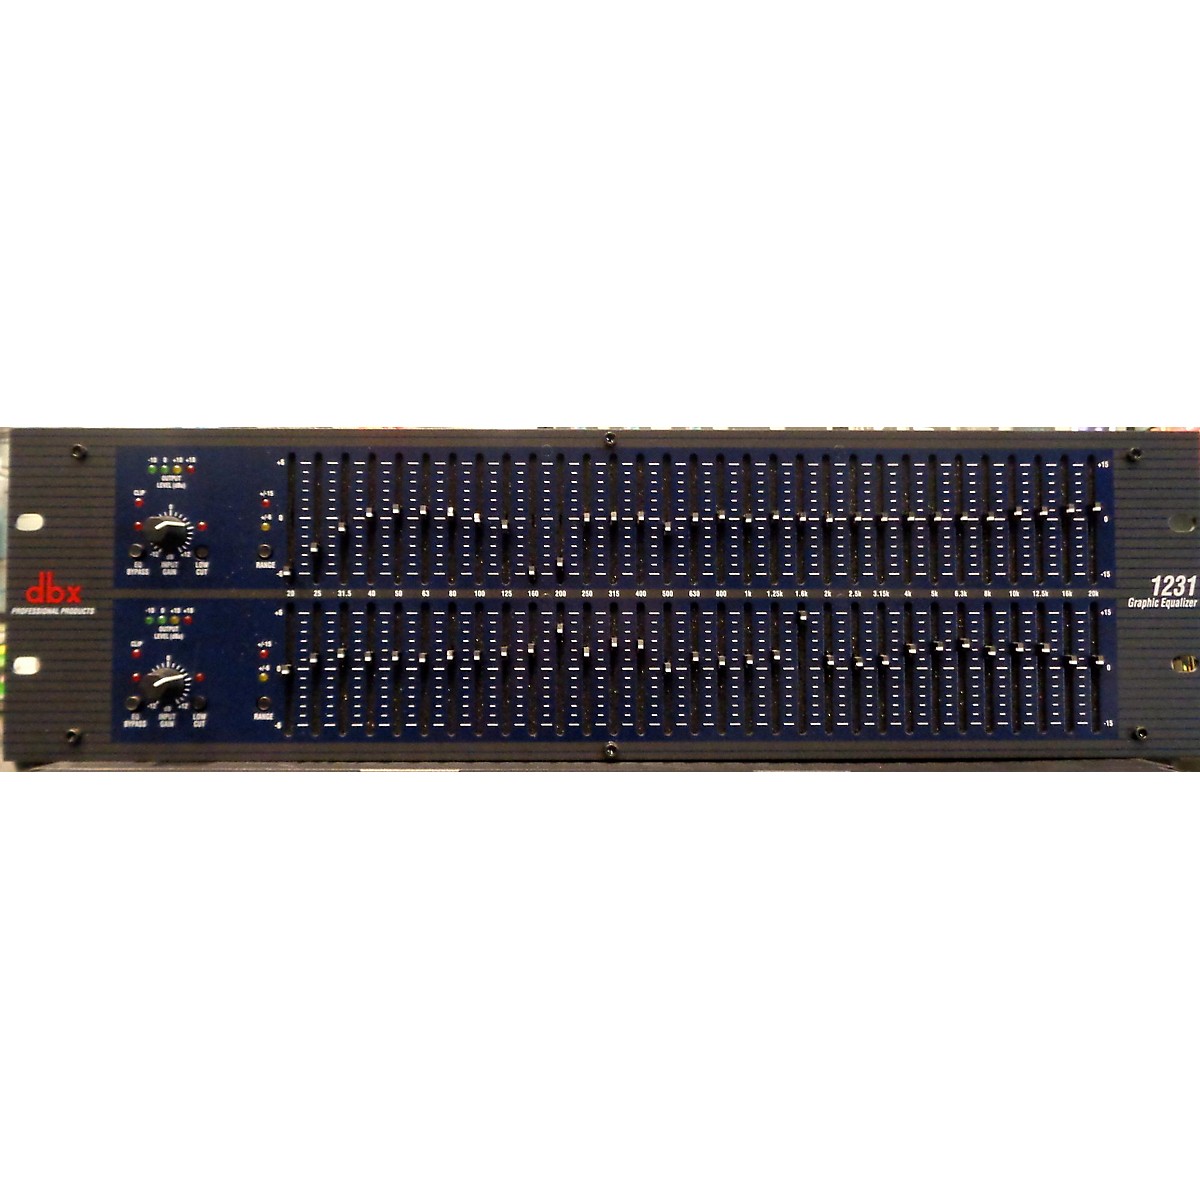 31 band graphic equalizer